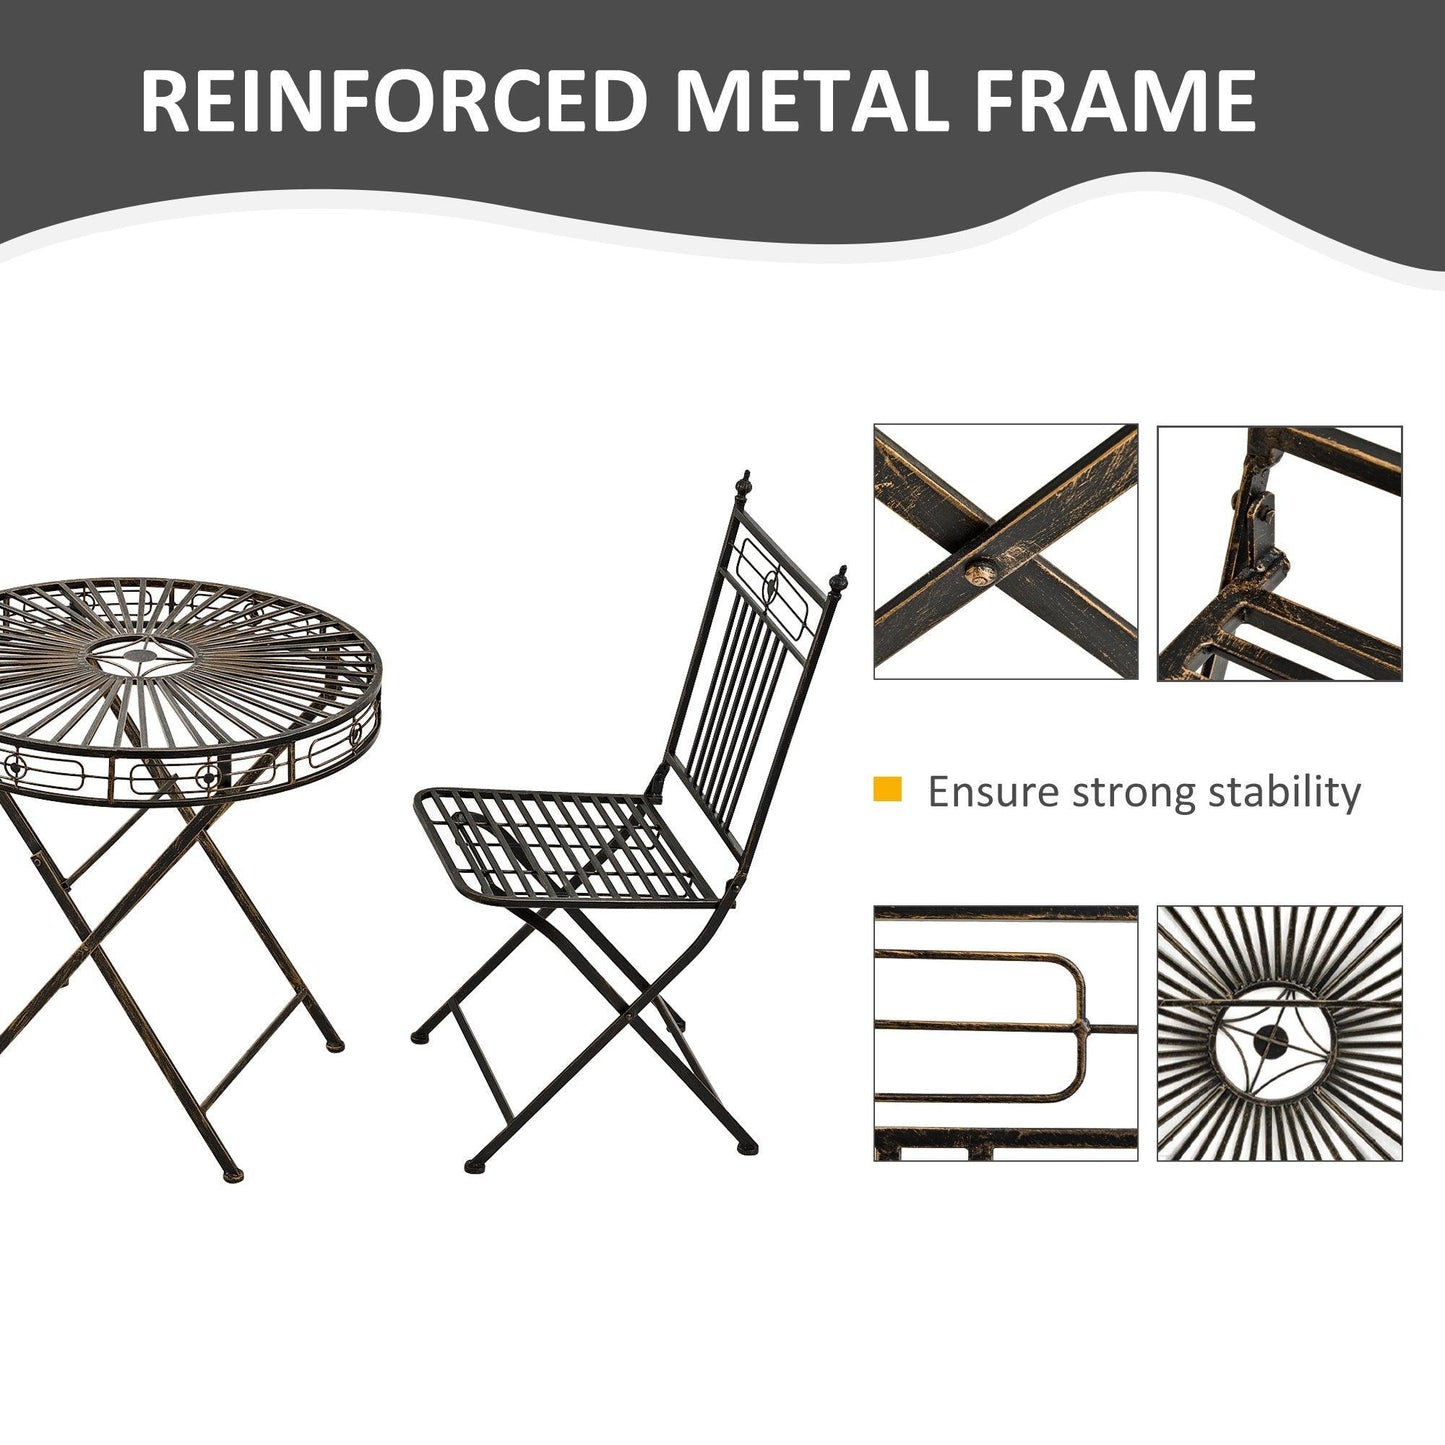 Outsunny Bistro Set: 2 Chairs + 1 Round Table - ALL4U RETAILER LTD